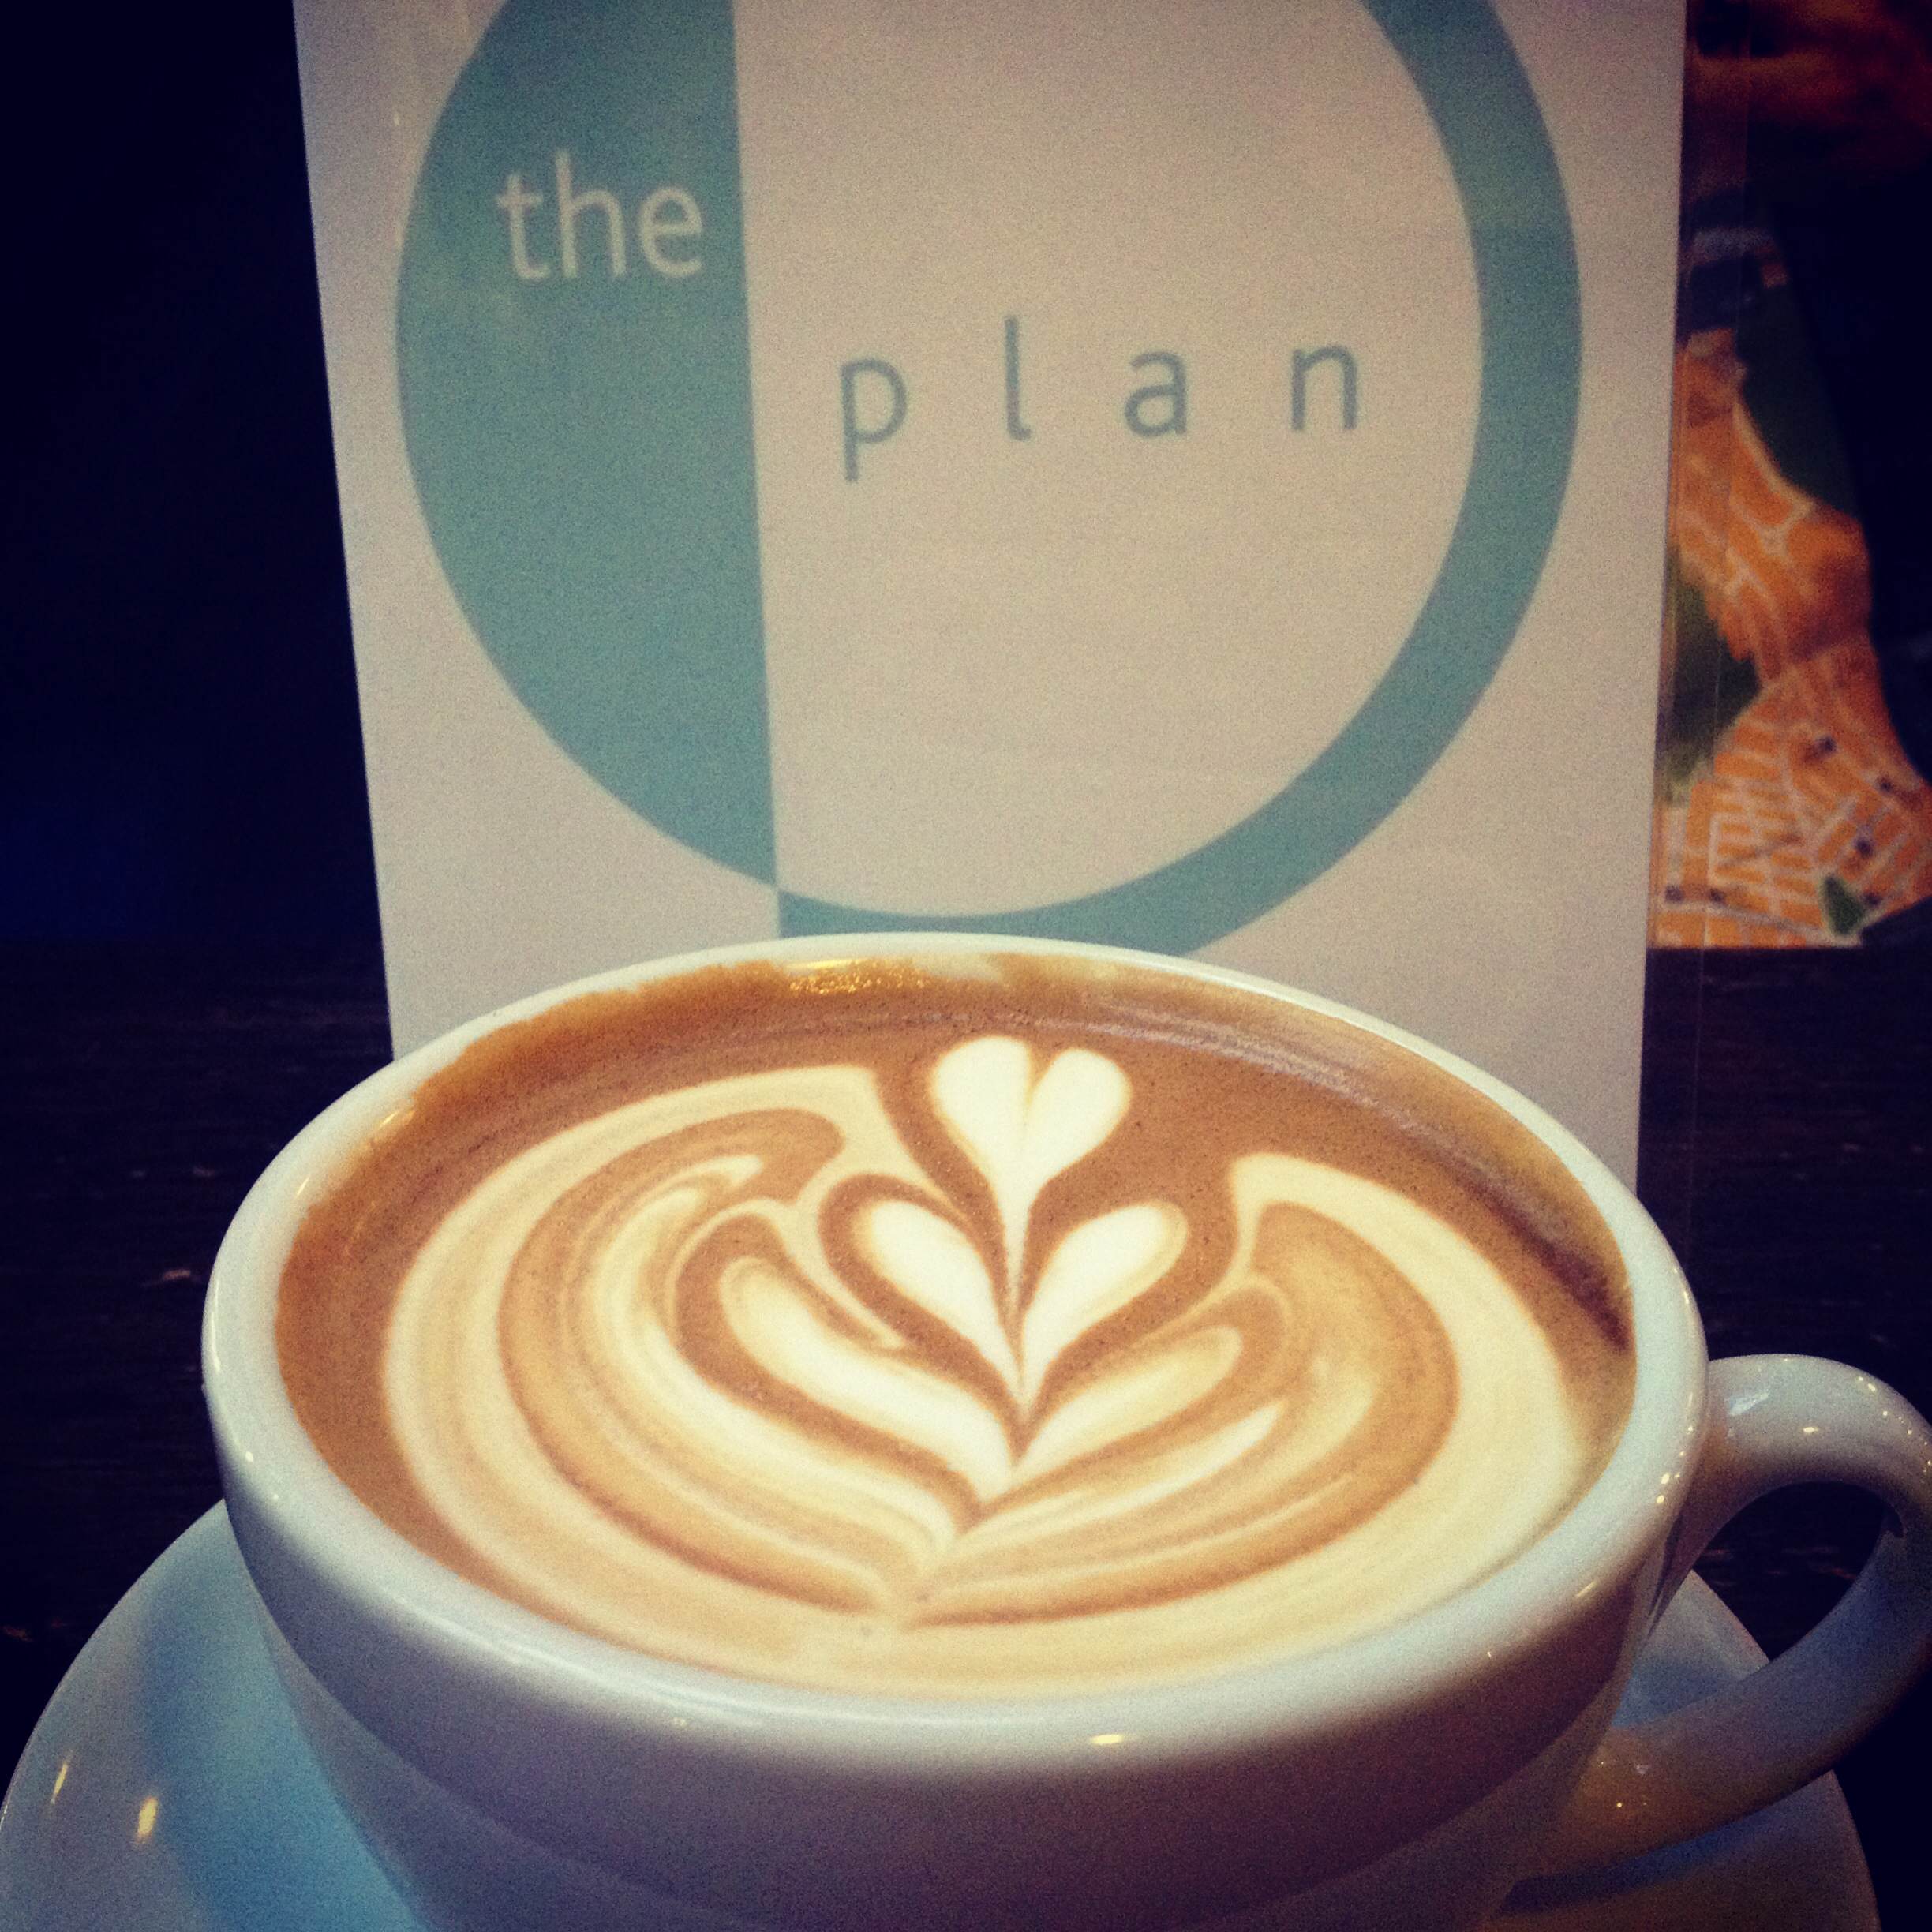 A fresh cuppa from 'The Plan' coffee shop in Cardiff.